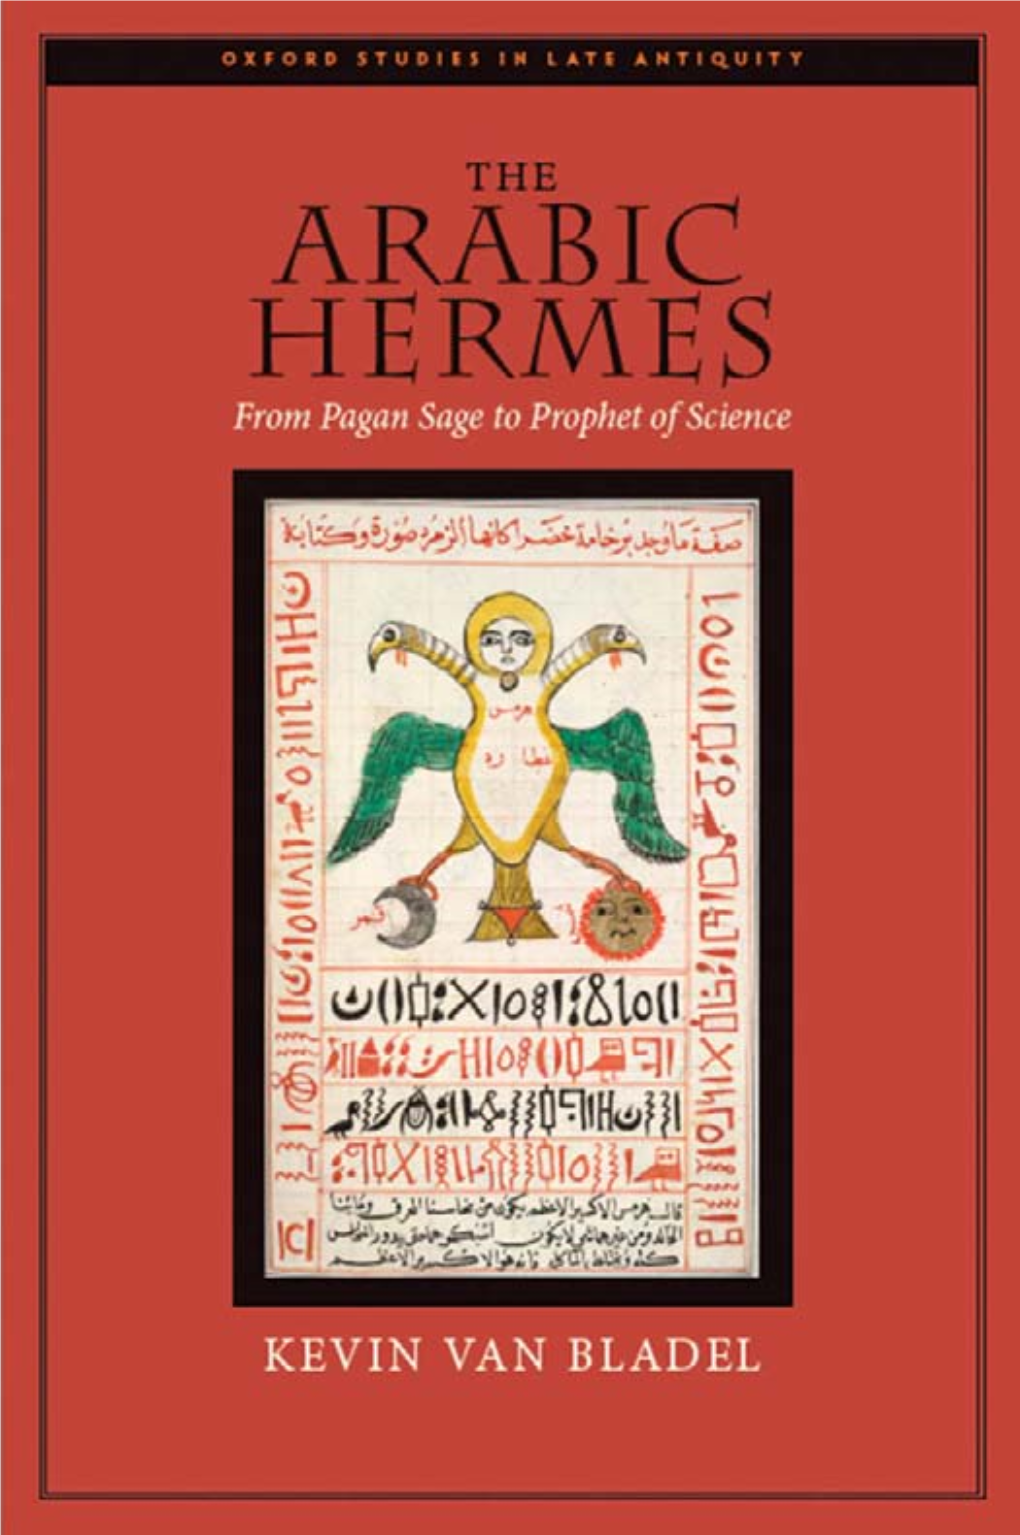 The Arabic Hermes from Pagan Sage to Prophet of Science